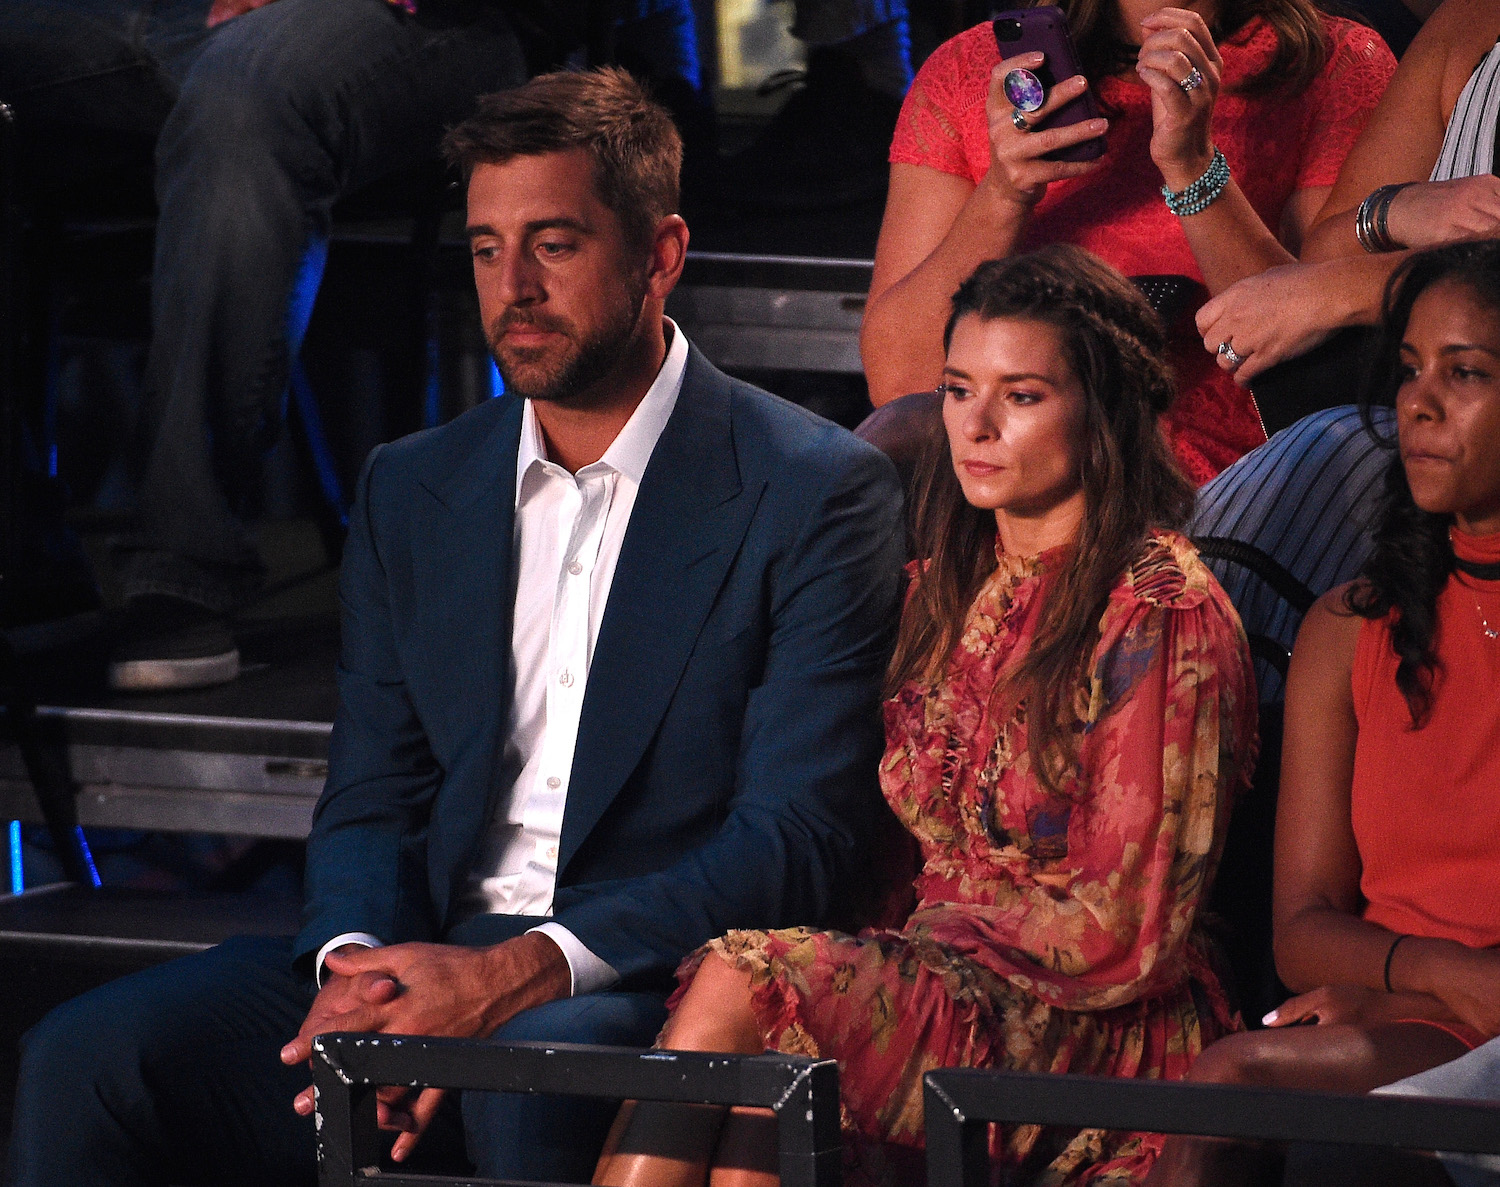 Aaron Rodgers and Danica Patrick sit solemnly in the audience during a TV show